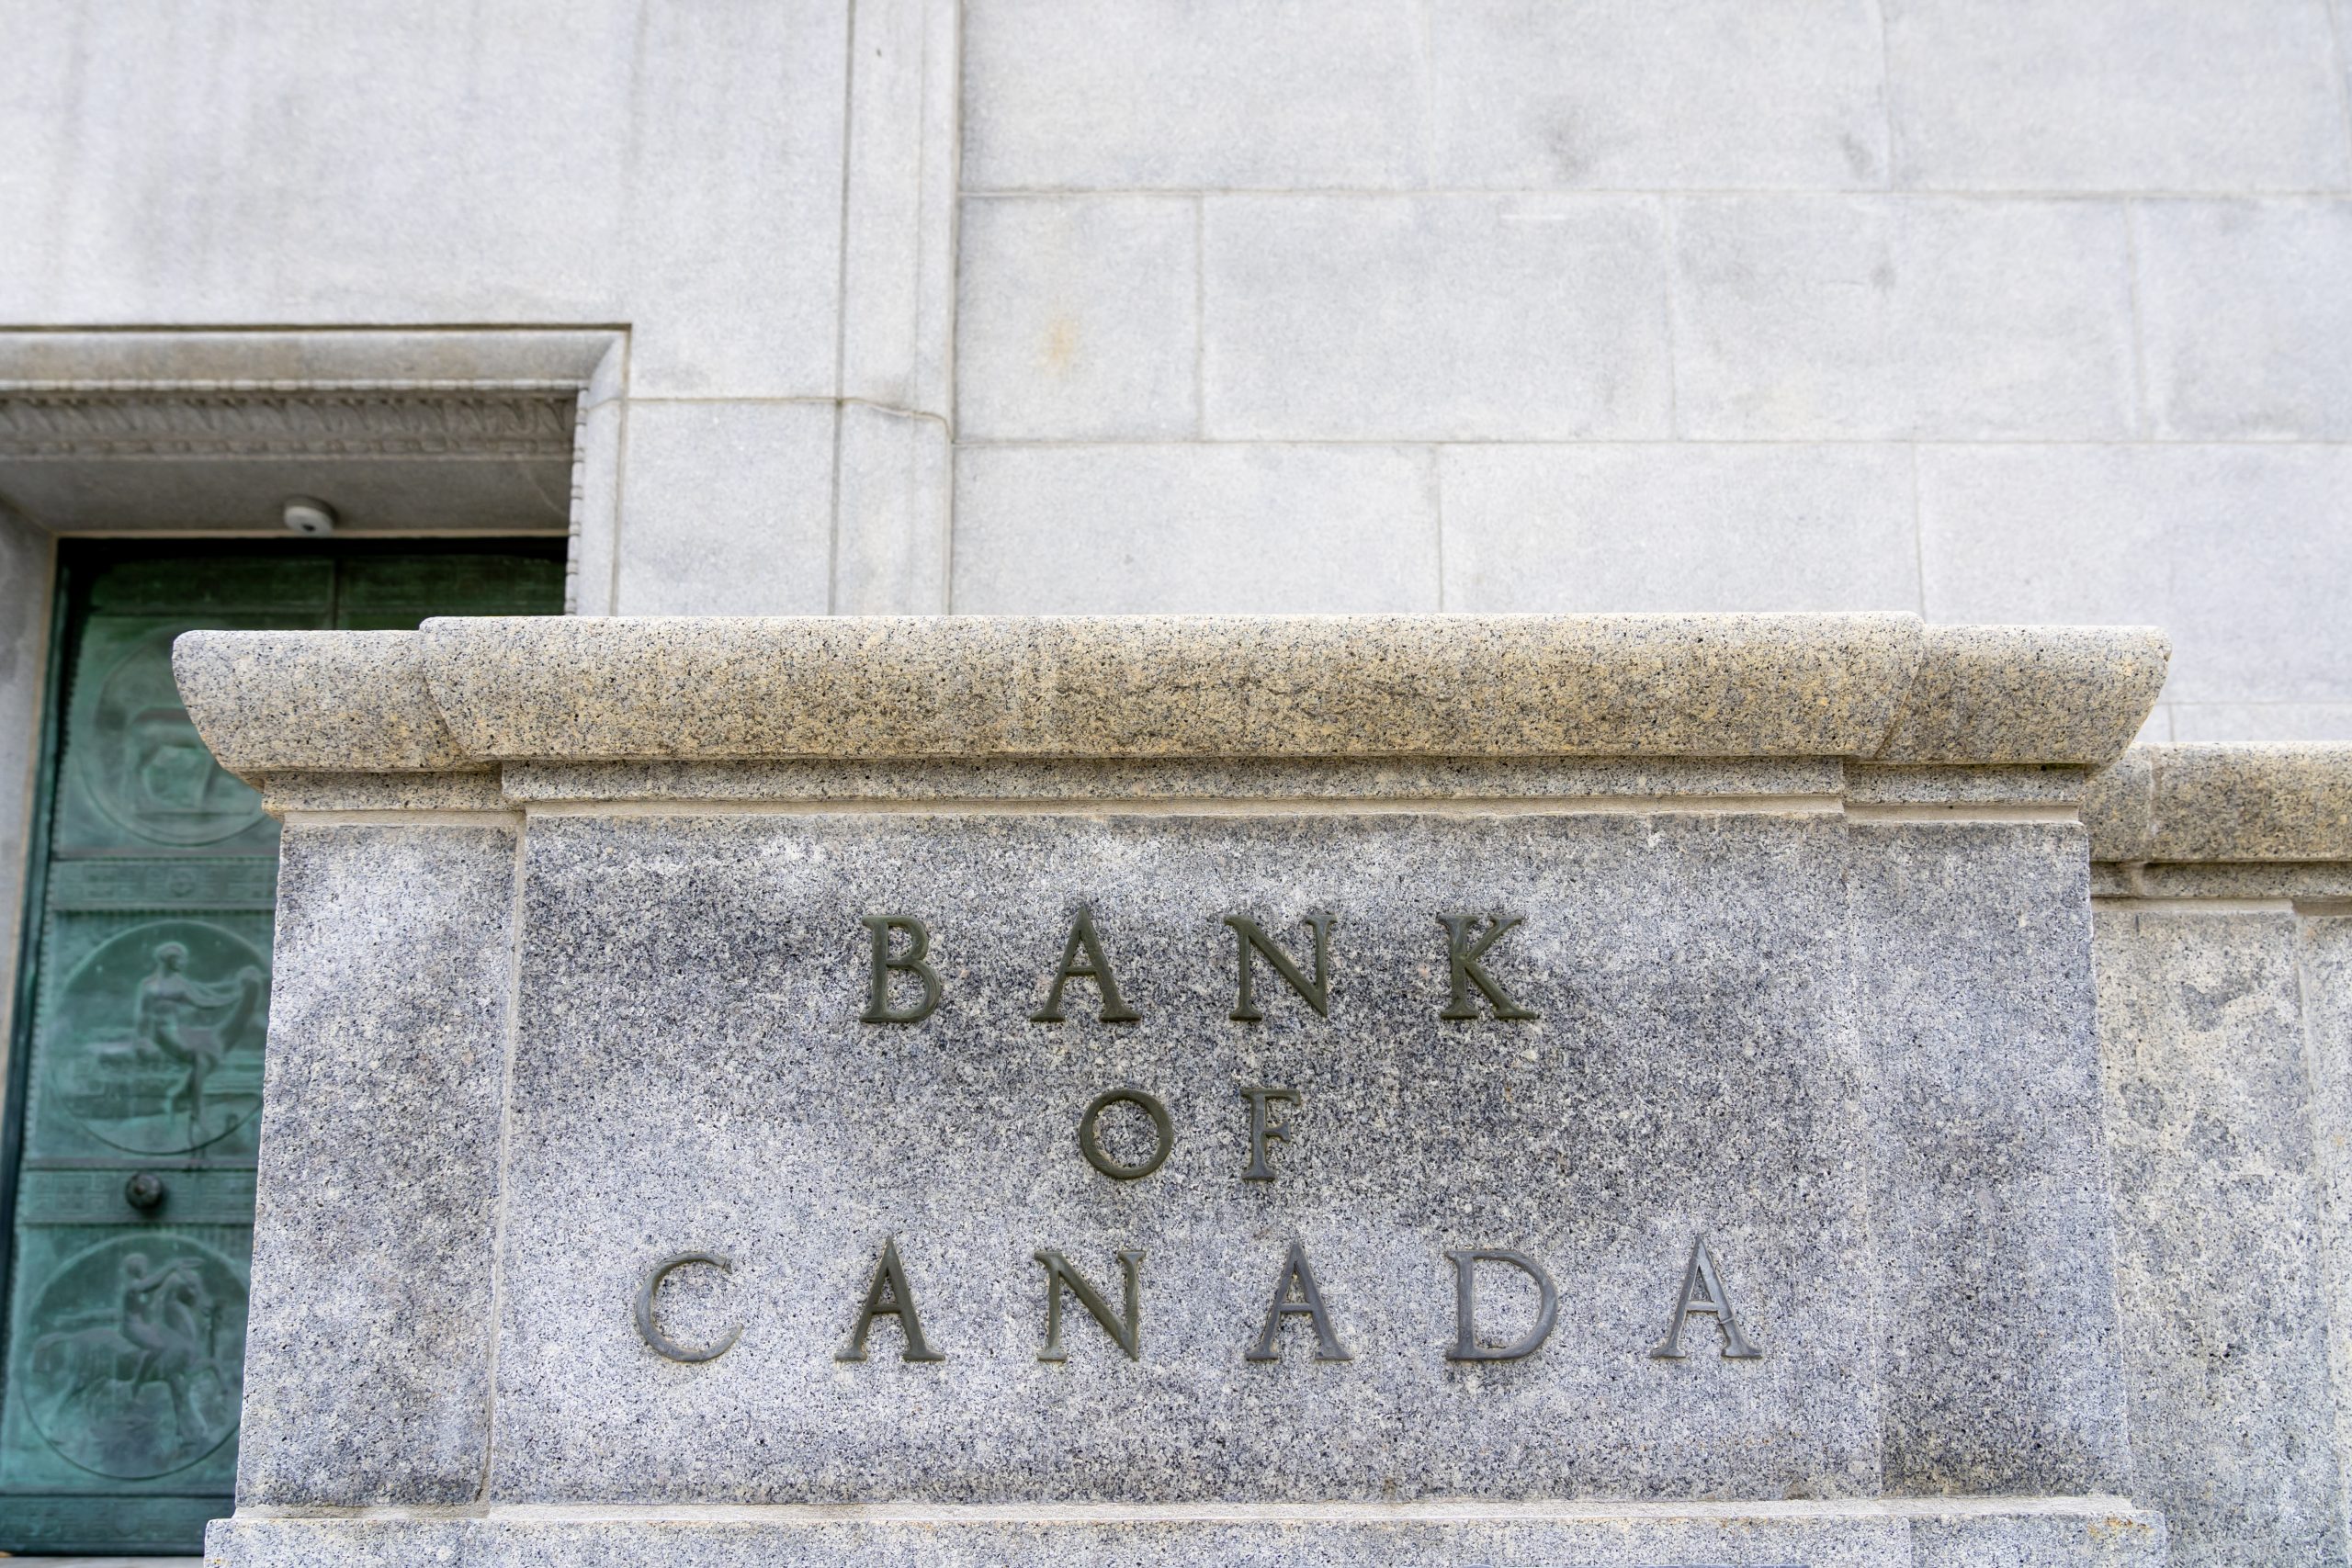 BANK OF CANADA BELIEVES INTEREST RATES NEED MORE TIME TO WORK, MINUTES REVEAL